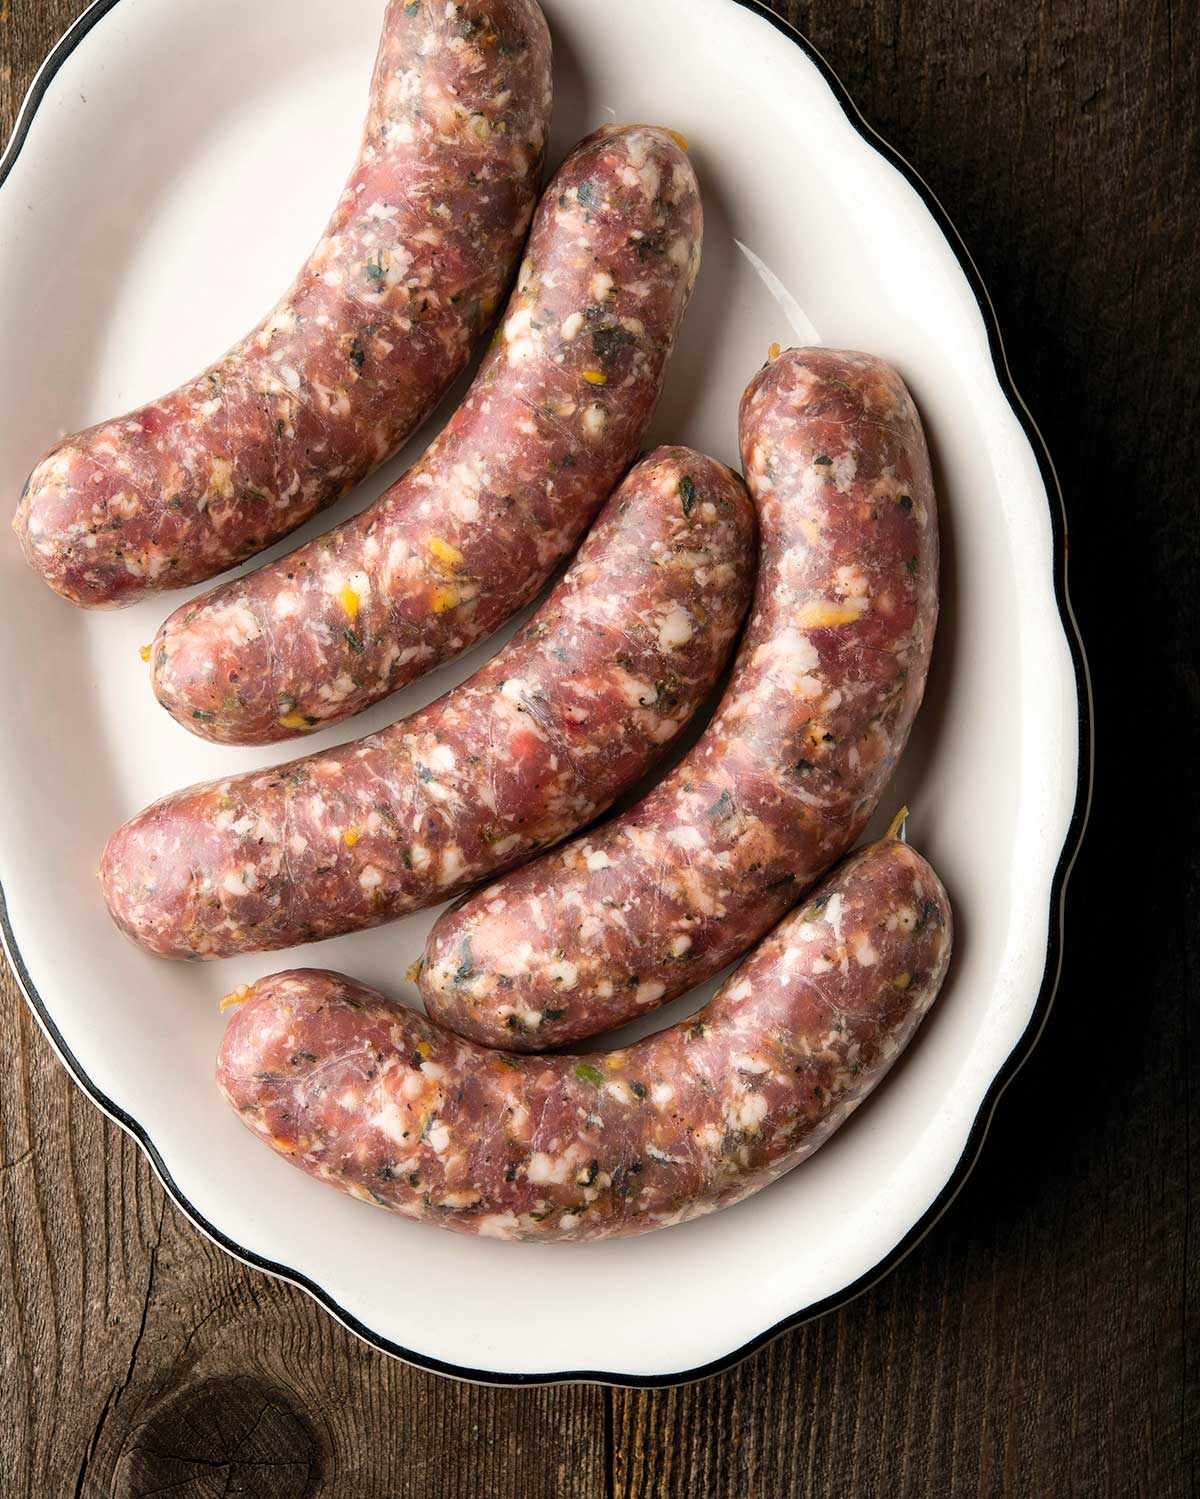 Five links of pheasant sausage on a platter.